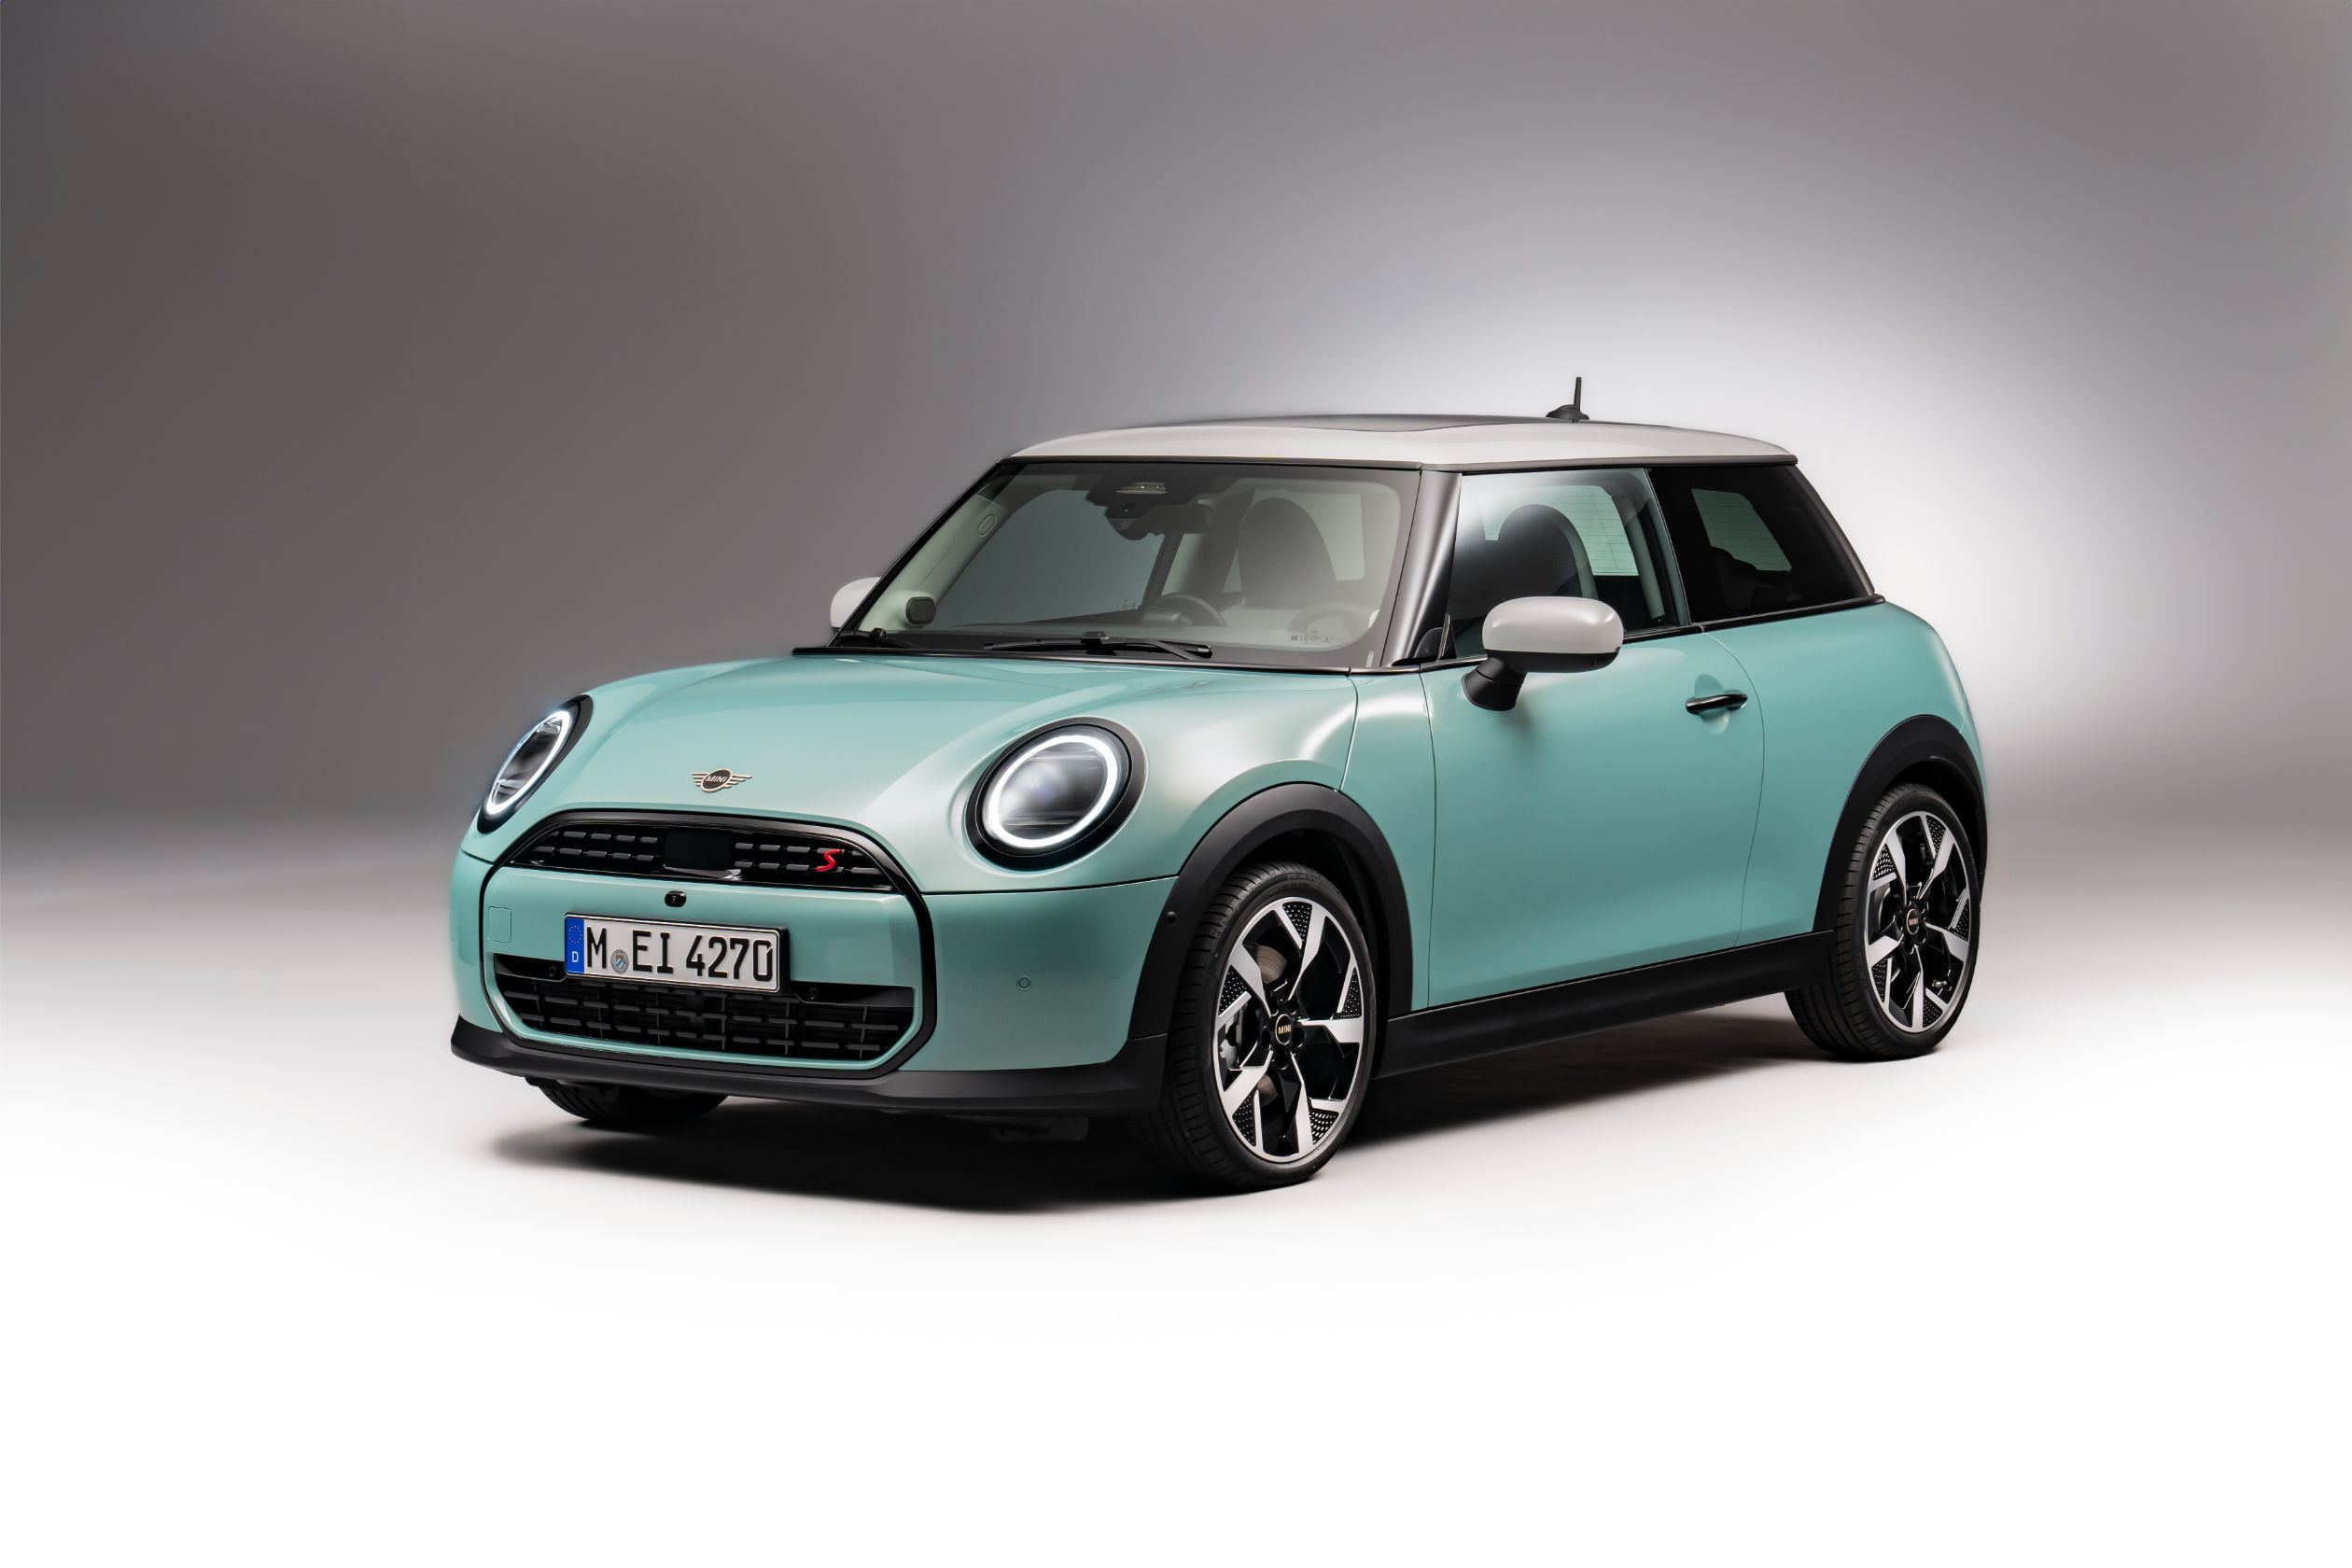 Luxury Cars, Mini Cooper: The Mini Cooper Drives Like A Peach And Packs In  A Lot Of Goodies - Forbes India